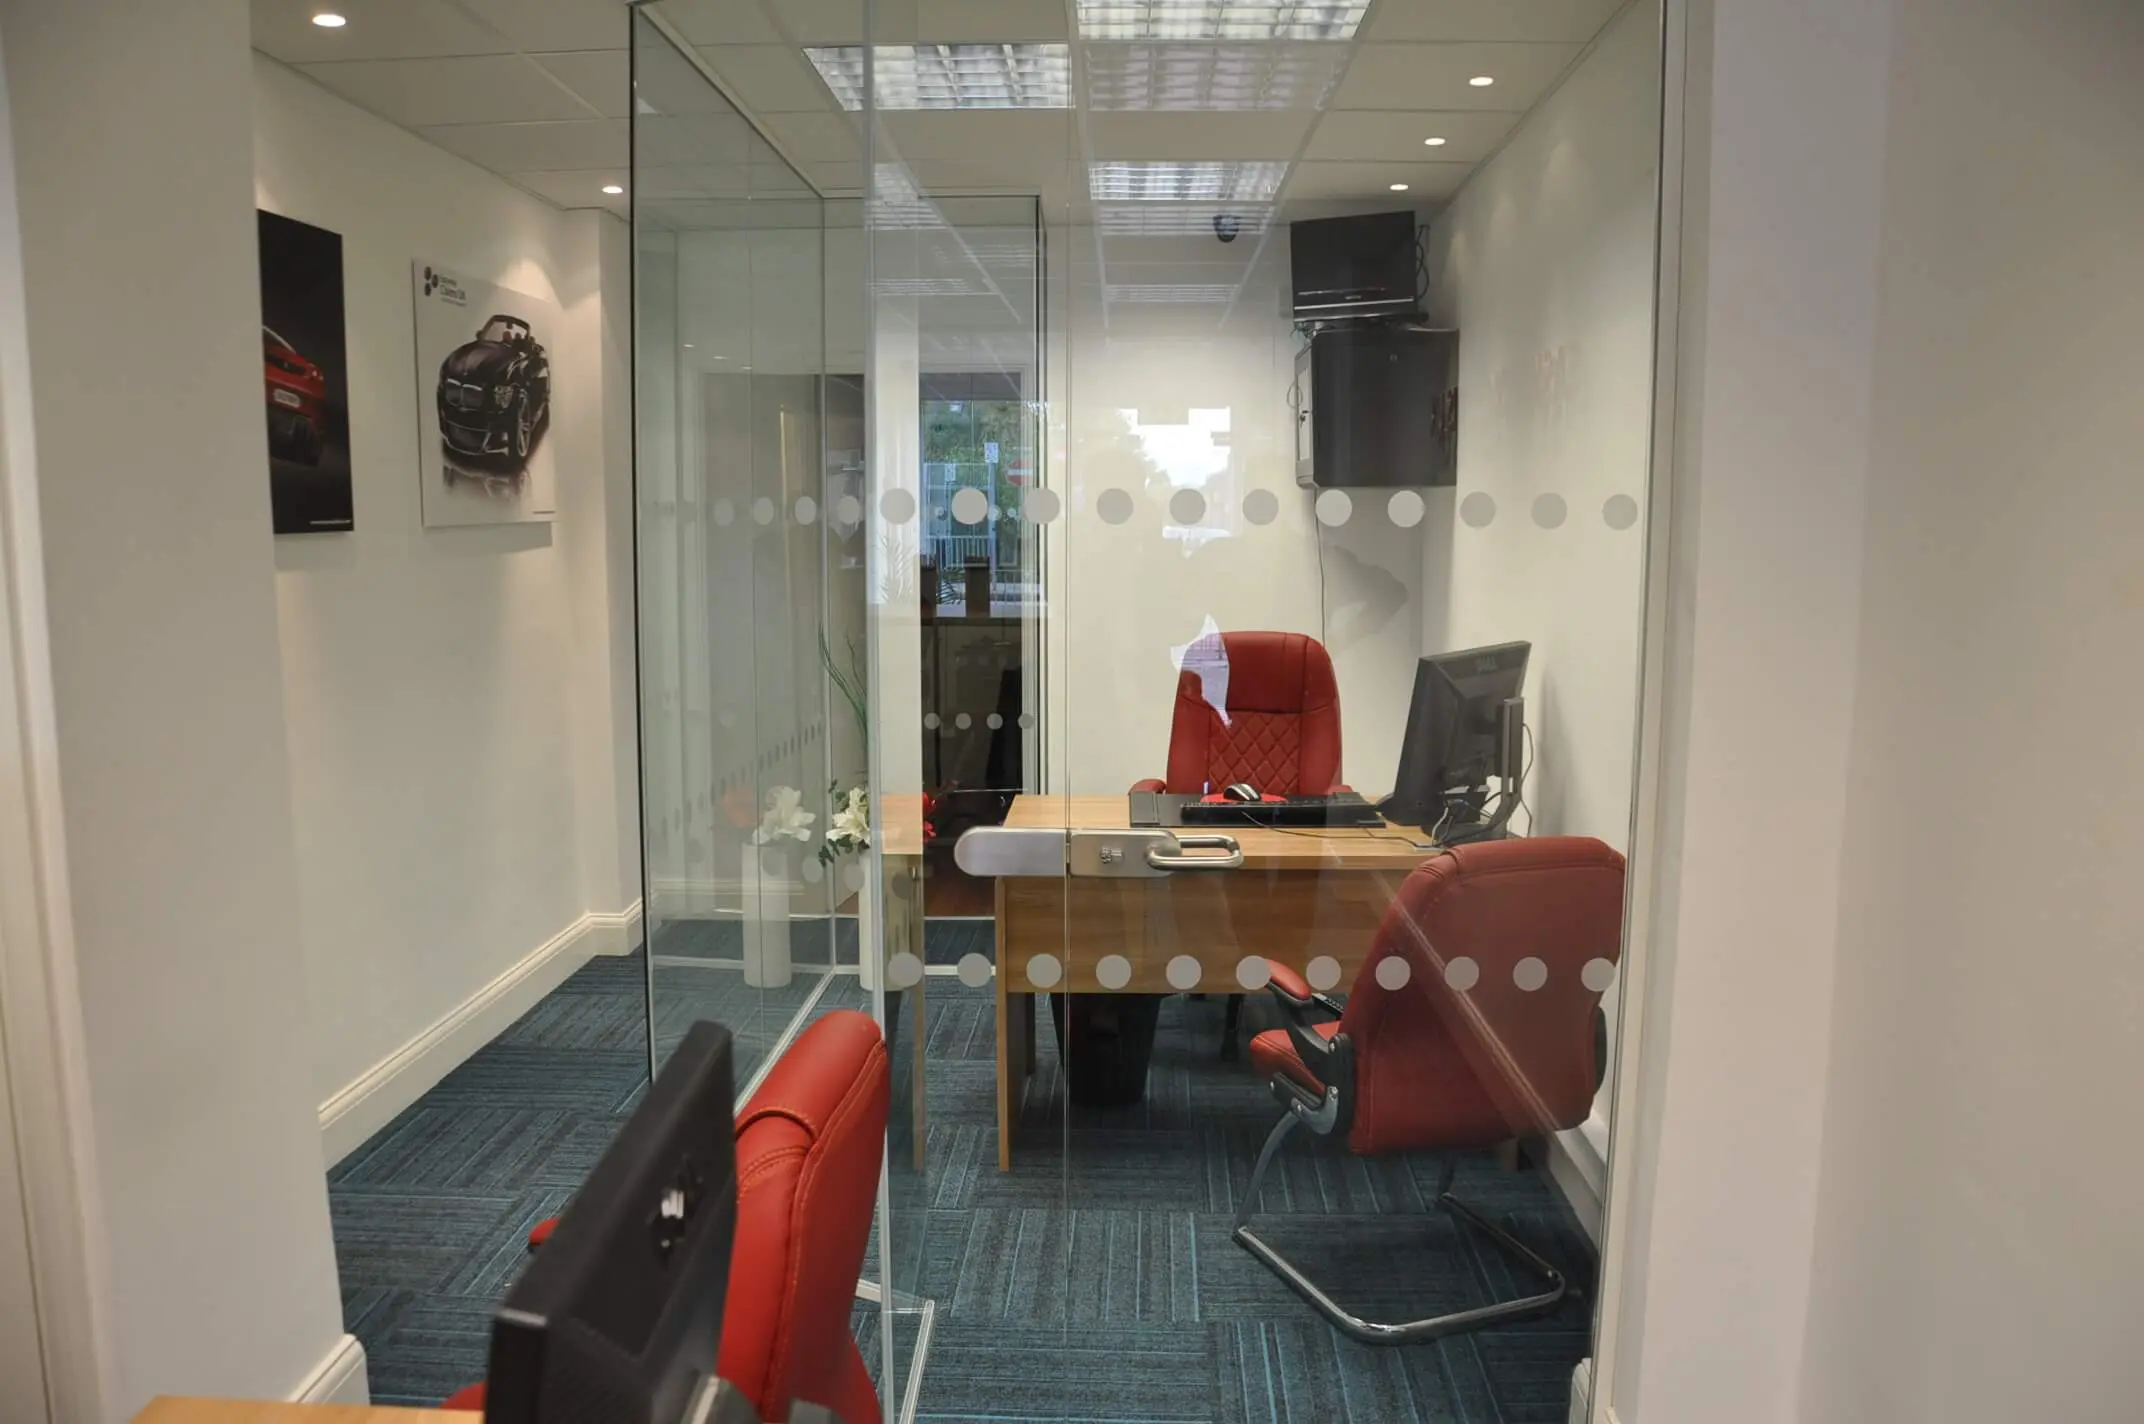 Easy Way offices executive space with glass partitions with dots